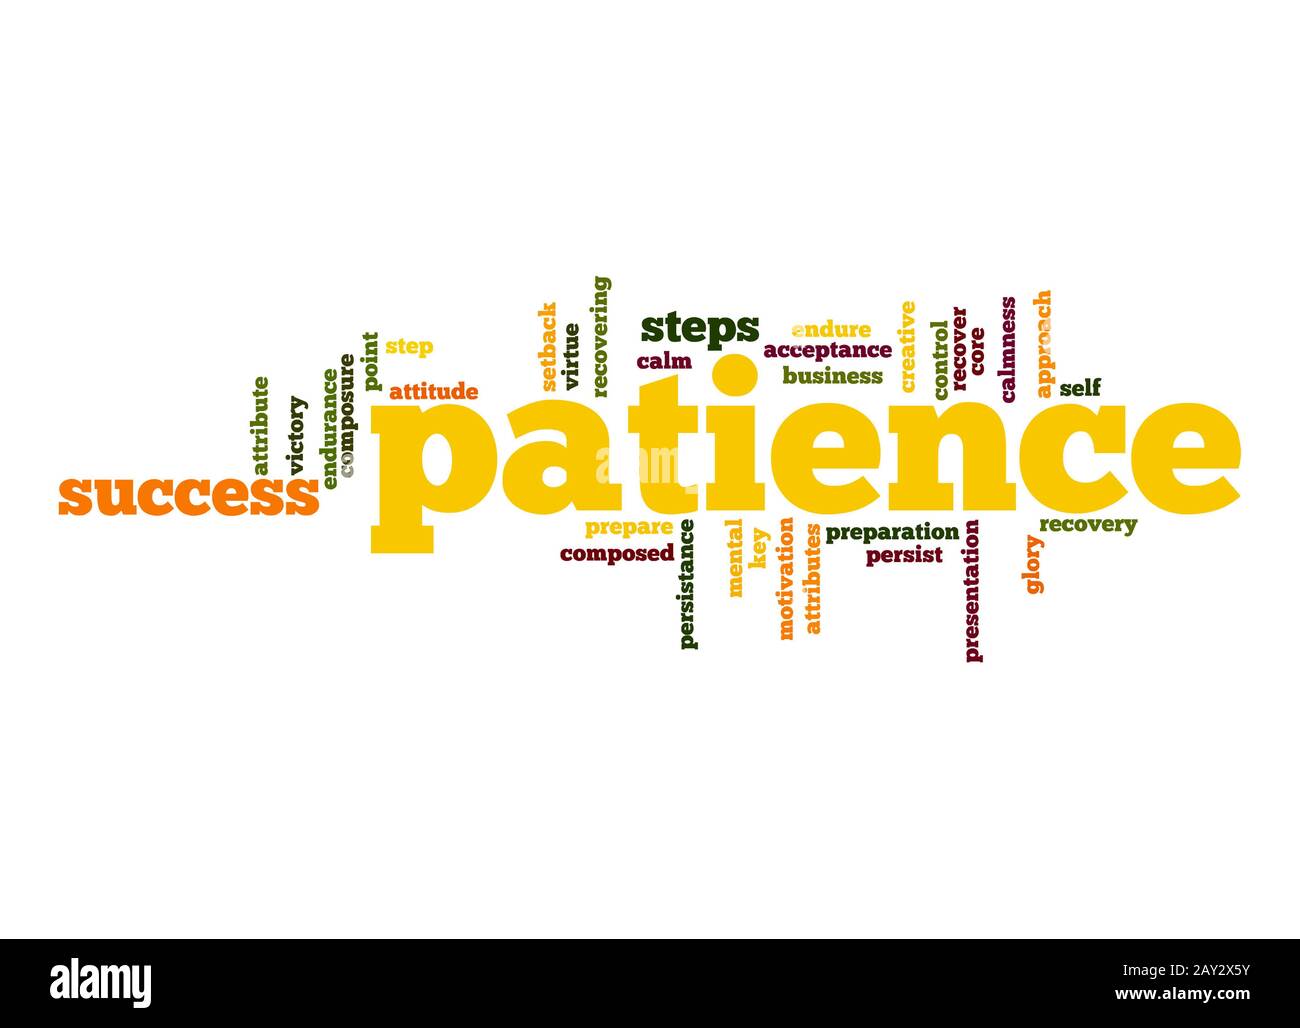 Patience word cloud Stock Photo